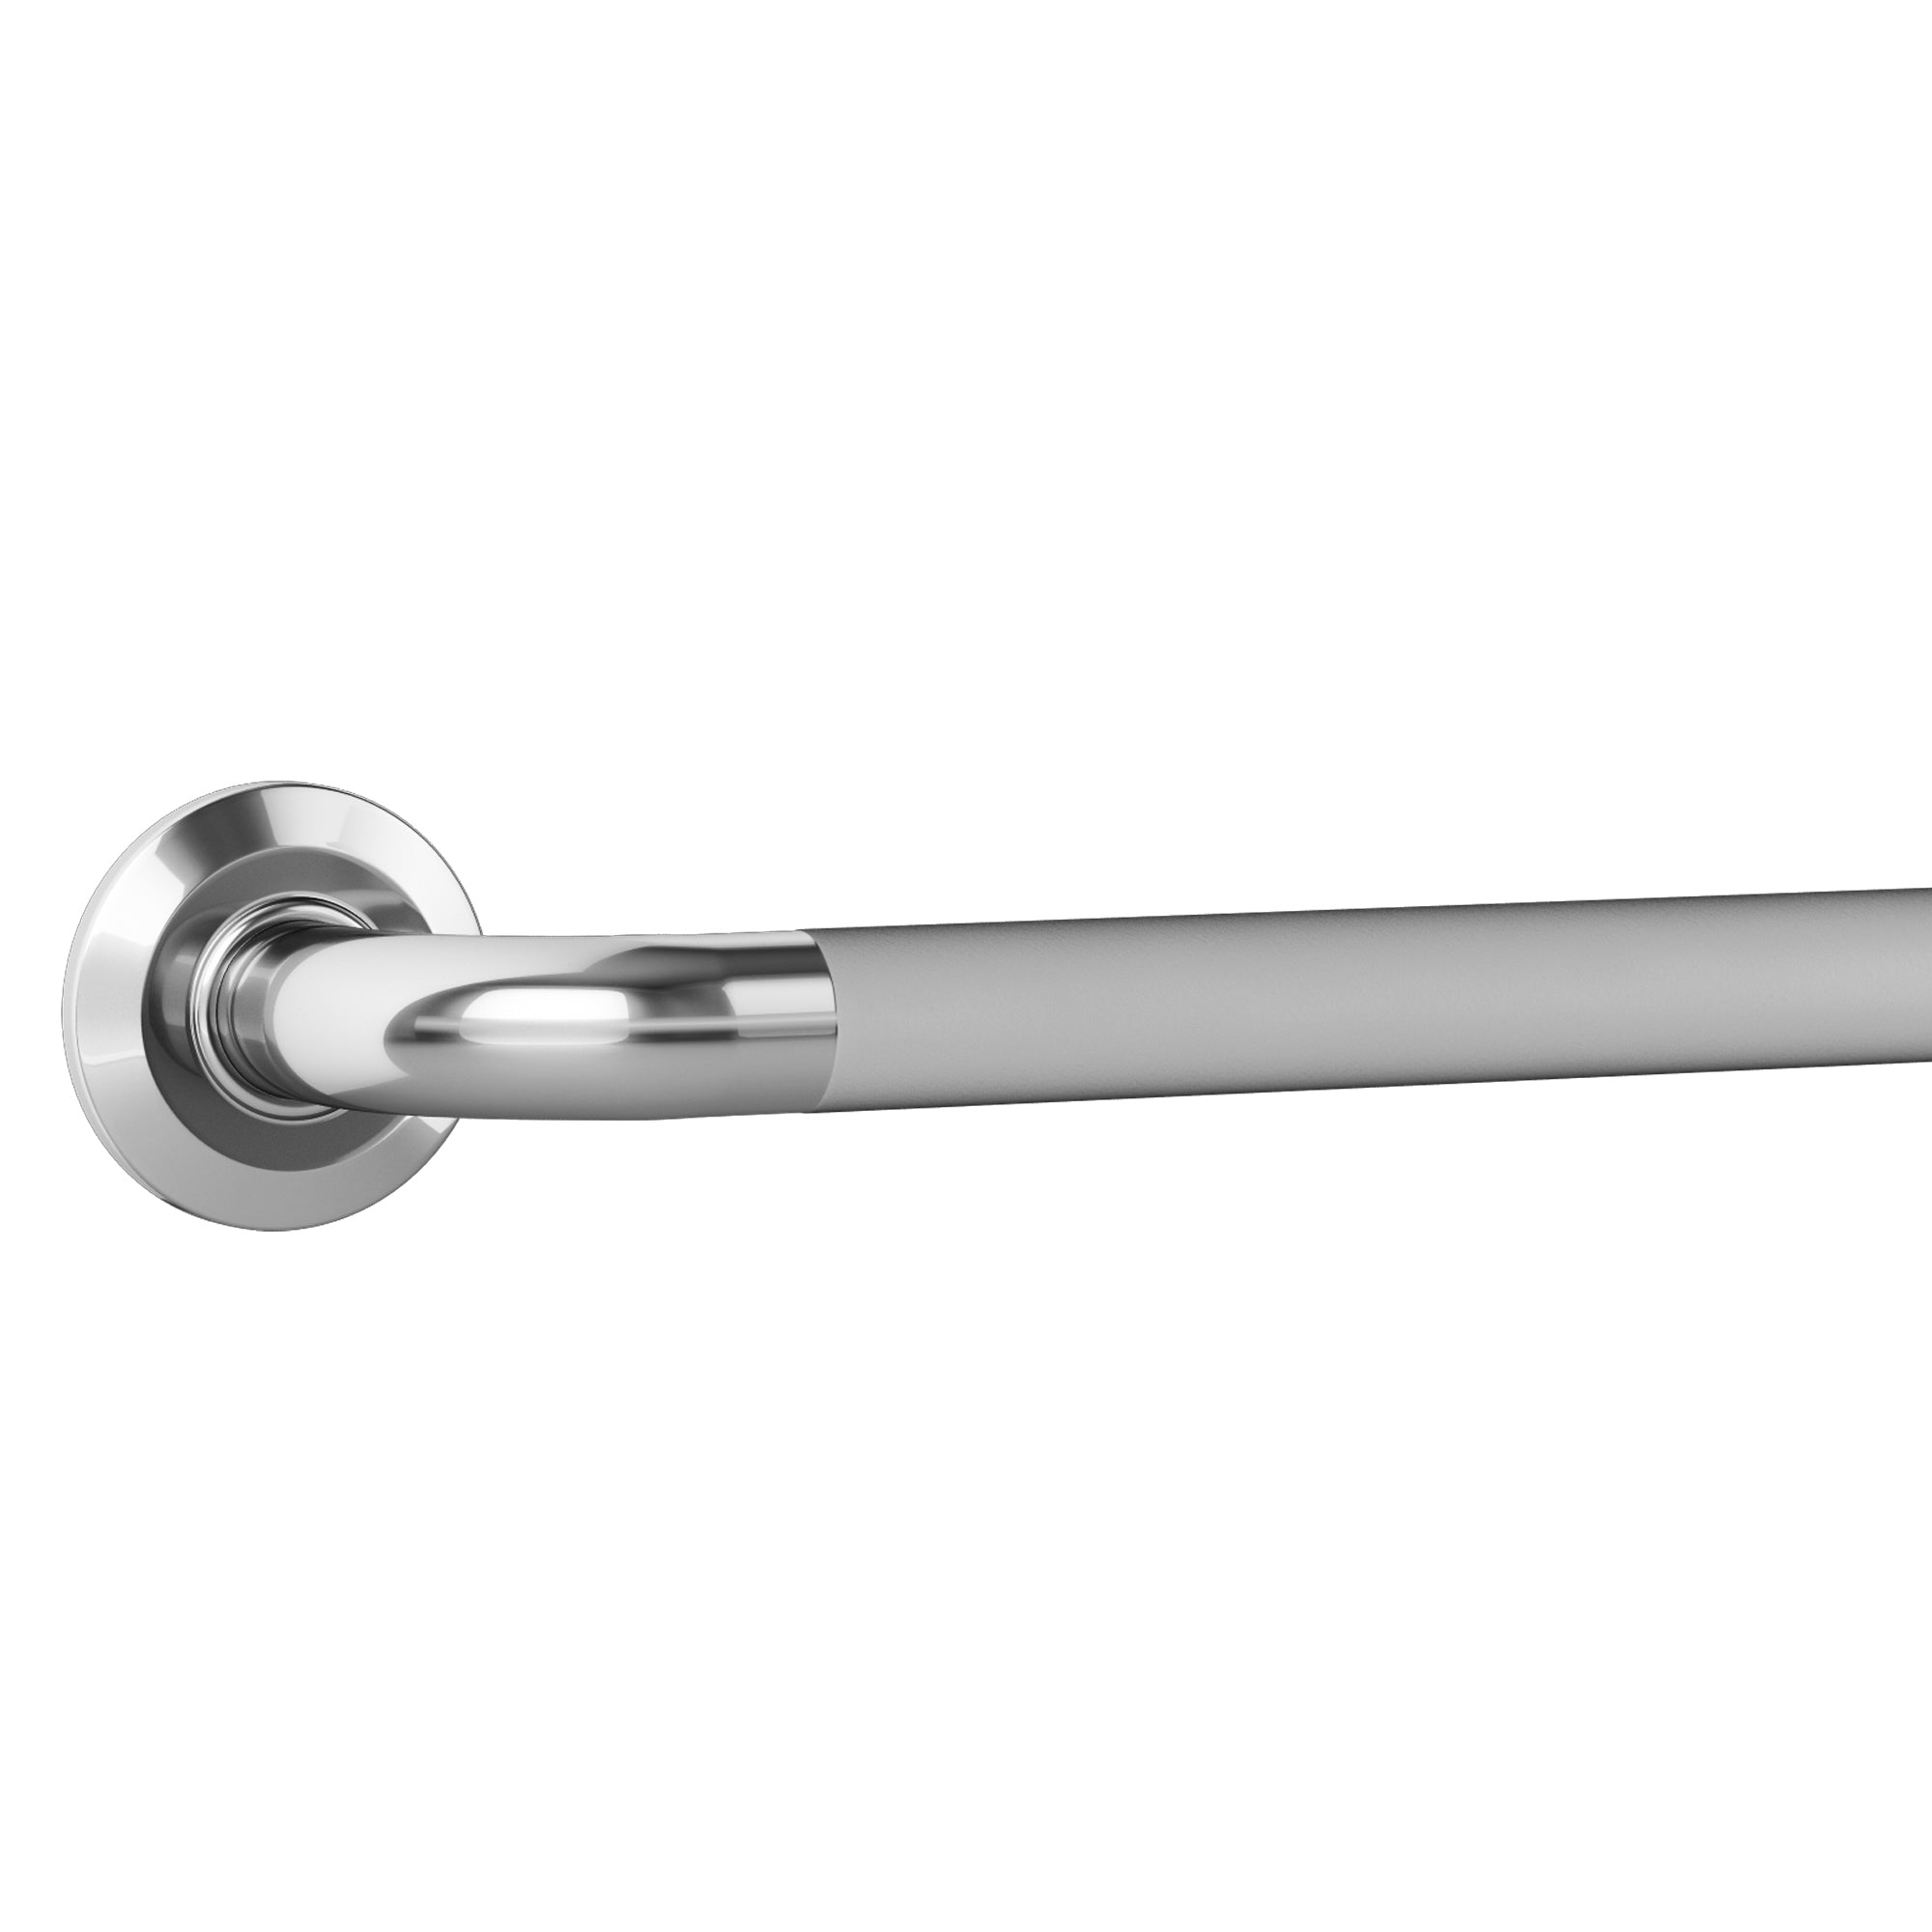 PULSE Ergo Safety Bar Stainless Steel - With a decorative design - Safety bar in Polished Chrome stainless finish - Ergonomic soft grip and Optional Towel Bar - 4006 - Vital Hydrotherapy